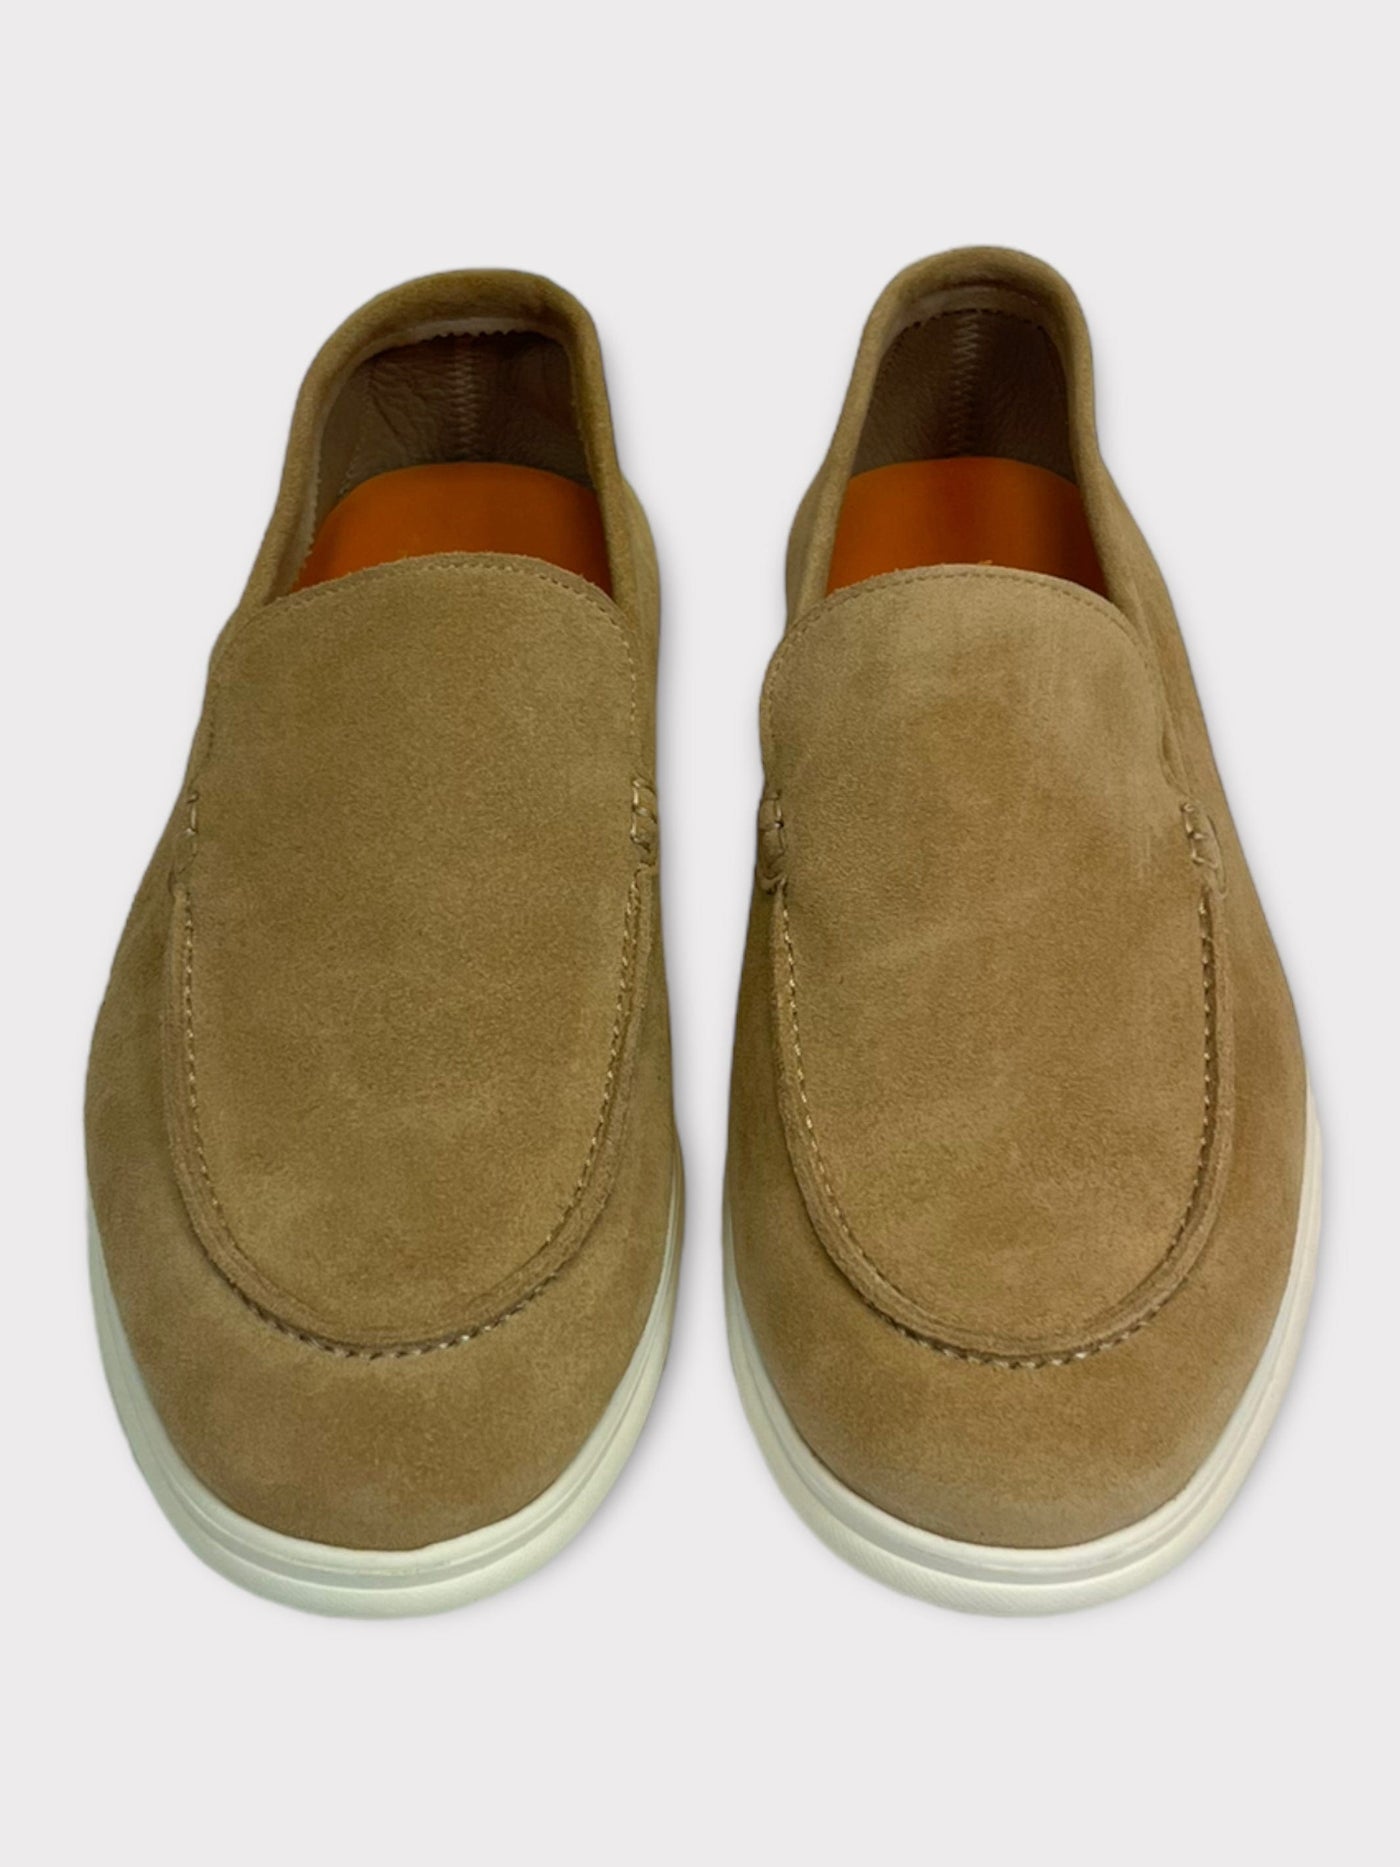 Super comfortable Suede Loafers